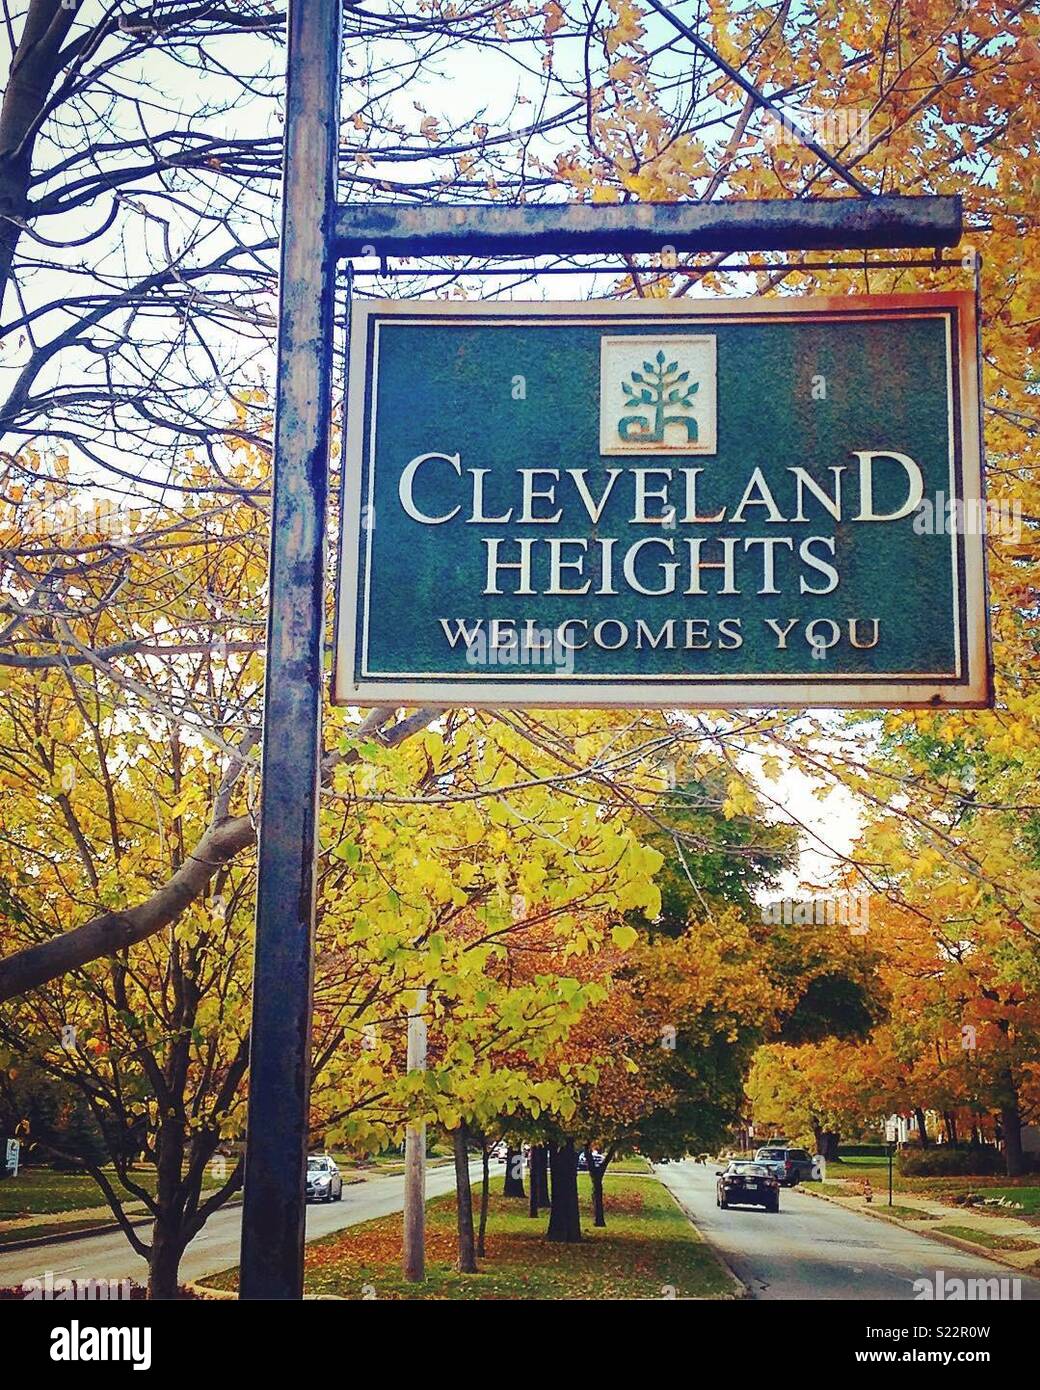 Cleveland Heights Stock Photo